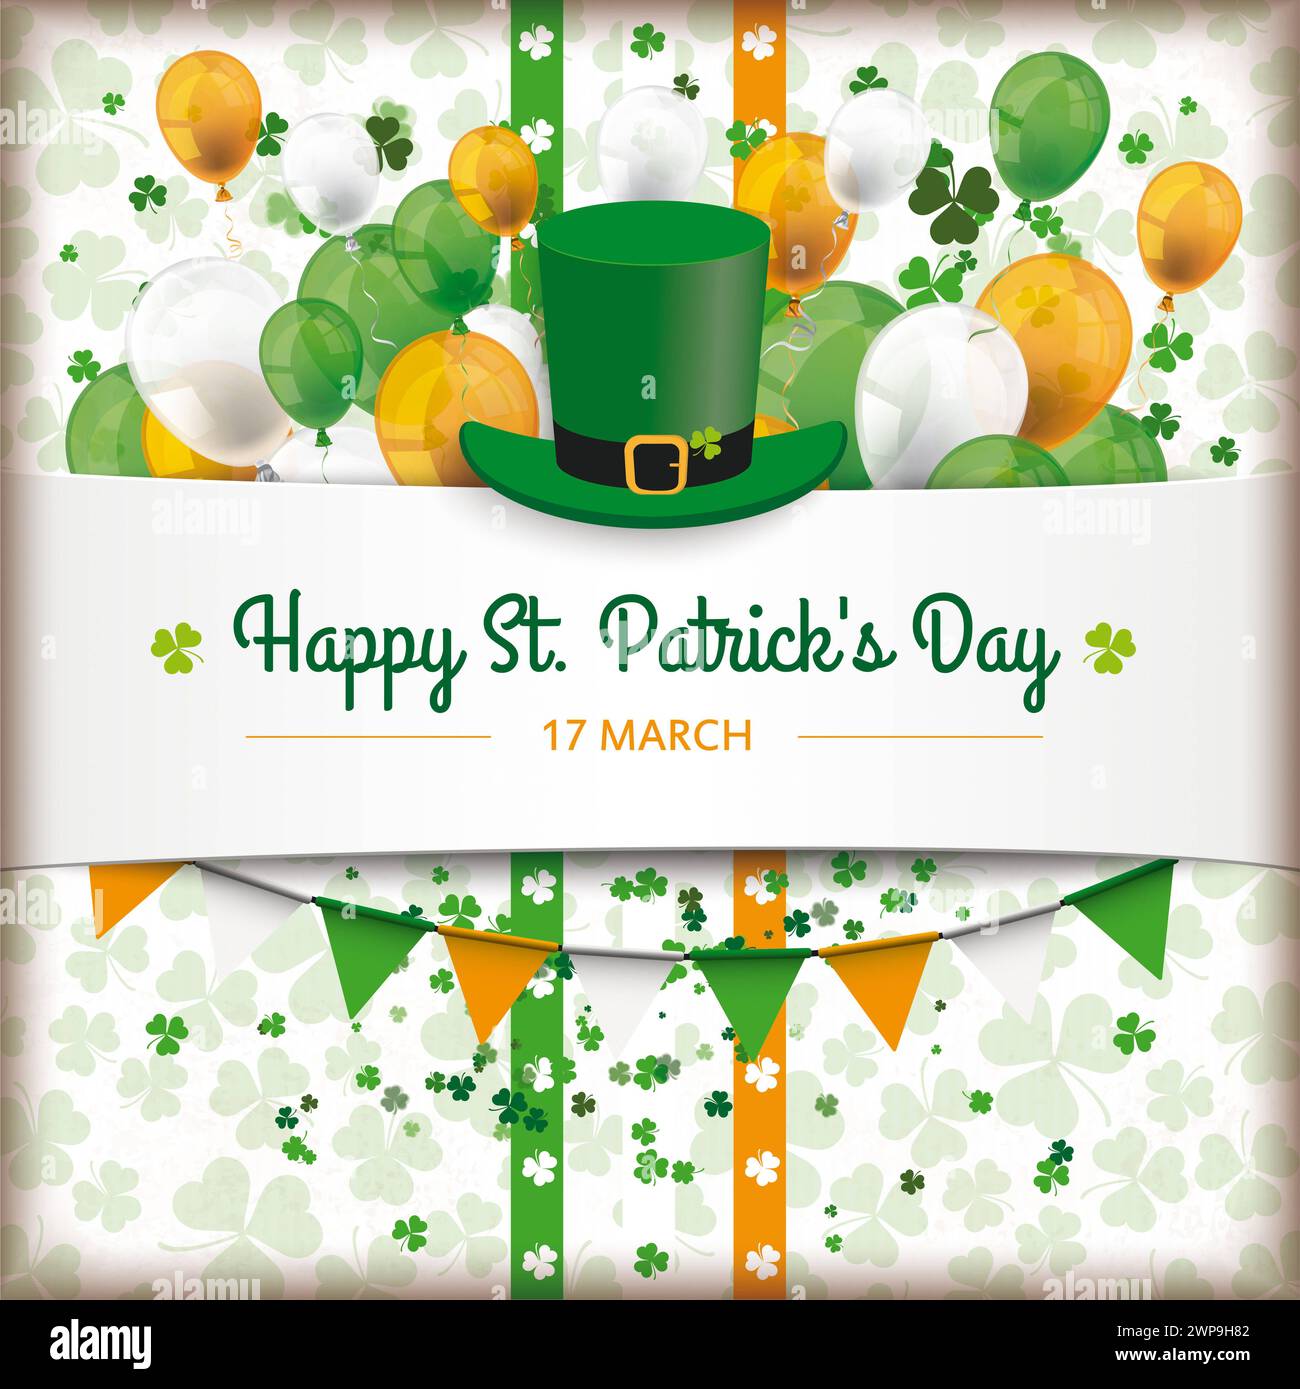 St Patricks Day Shamrock White Cover Balloons Garlands Vintage cover with for St. Patrick s Day. Stock Photo